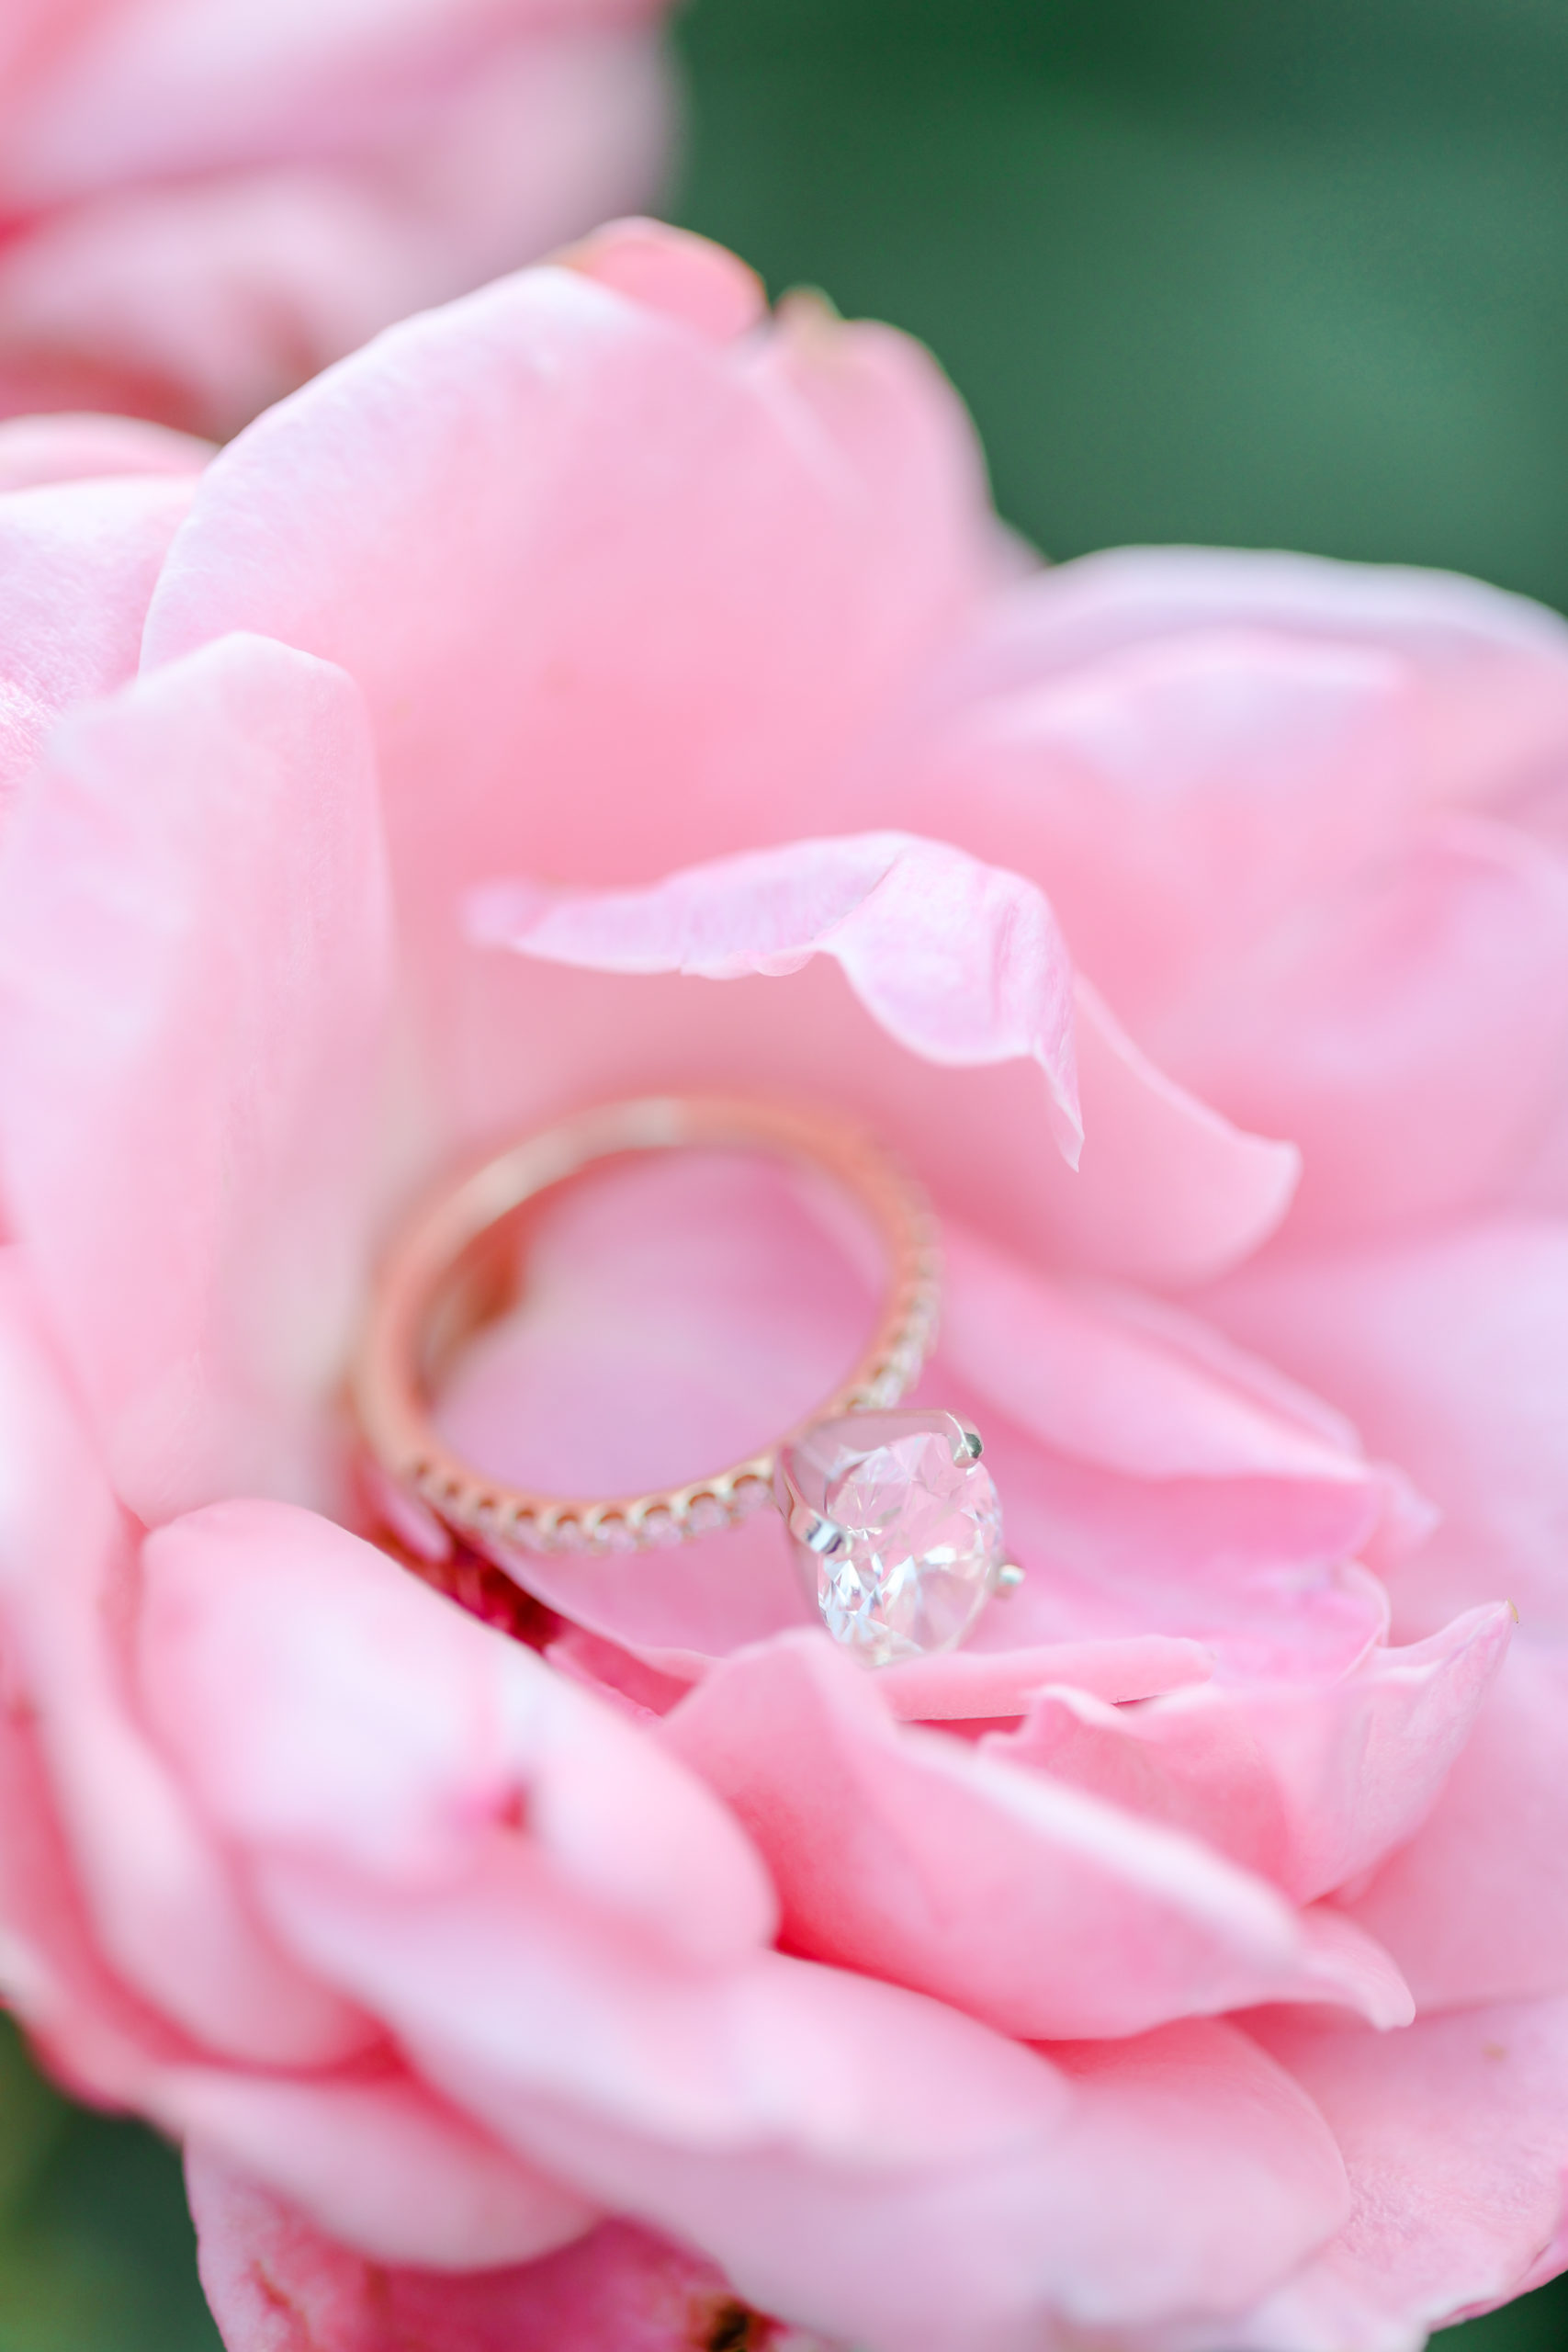 beautiful engagement ring on pink flower - Best Places in Kansas City for Wedding Photos - Loose Park KC - Engagement Photo Location Ideas - What to Wear Engagement Session - Loose Park Rose Garden - Best Photographer in Kansas City - Best Locations in KC to Take Photos - Black Wedding Photographer - Wedding Photographers in Kansas